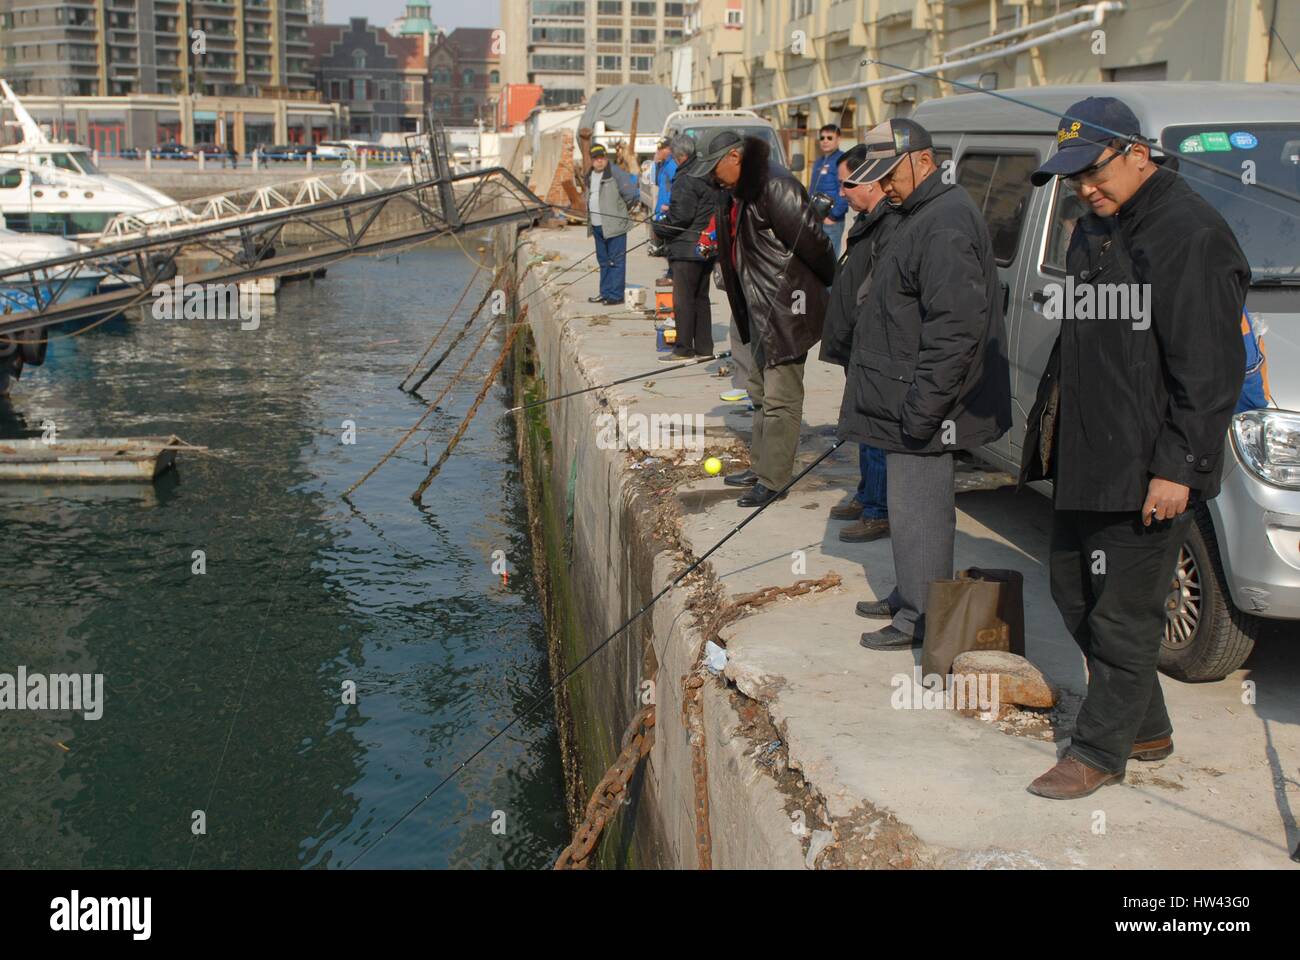 Qingdao, Qingdao, China. 16th Mar, 2017. Qingdao, CHINA-March 16 2017: (EDITORIAL USE ONLY. CHINA OUT).Some citizens buy more than 500 kilogram of fish and set them free to the sea in Qingdao, east China's Shandong Province, March 16th, 2017. However, some other citizens keep fishing nearby, which is very ironic. Credit: SIPA Asia/ZUMA Wire/Alamy Live News Stock Photo